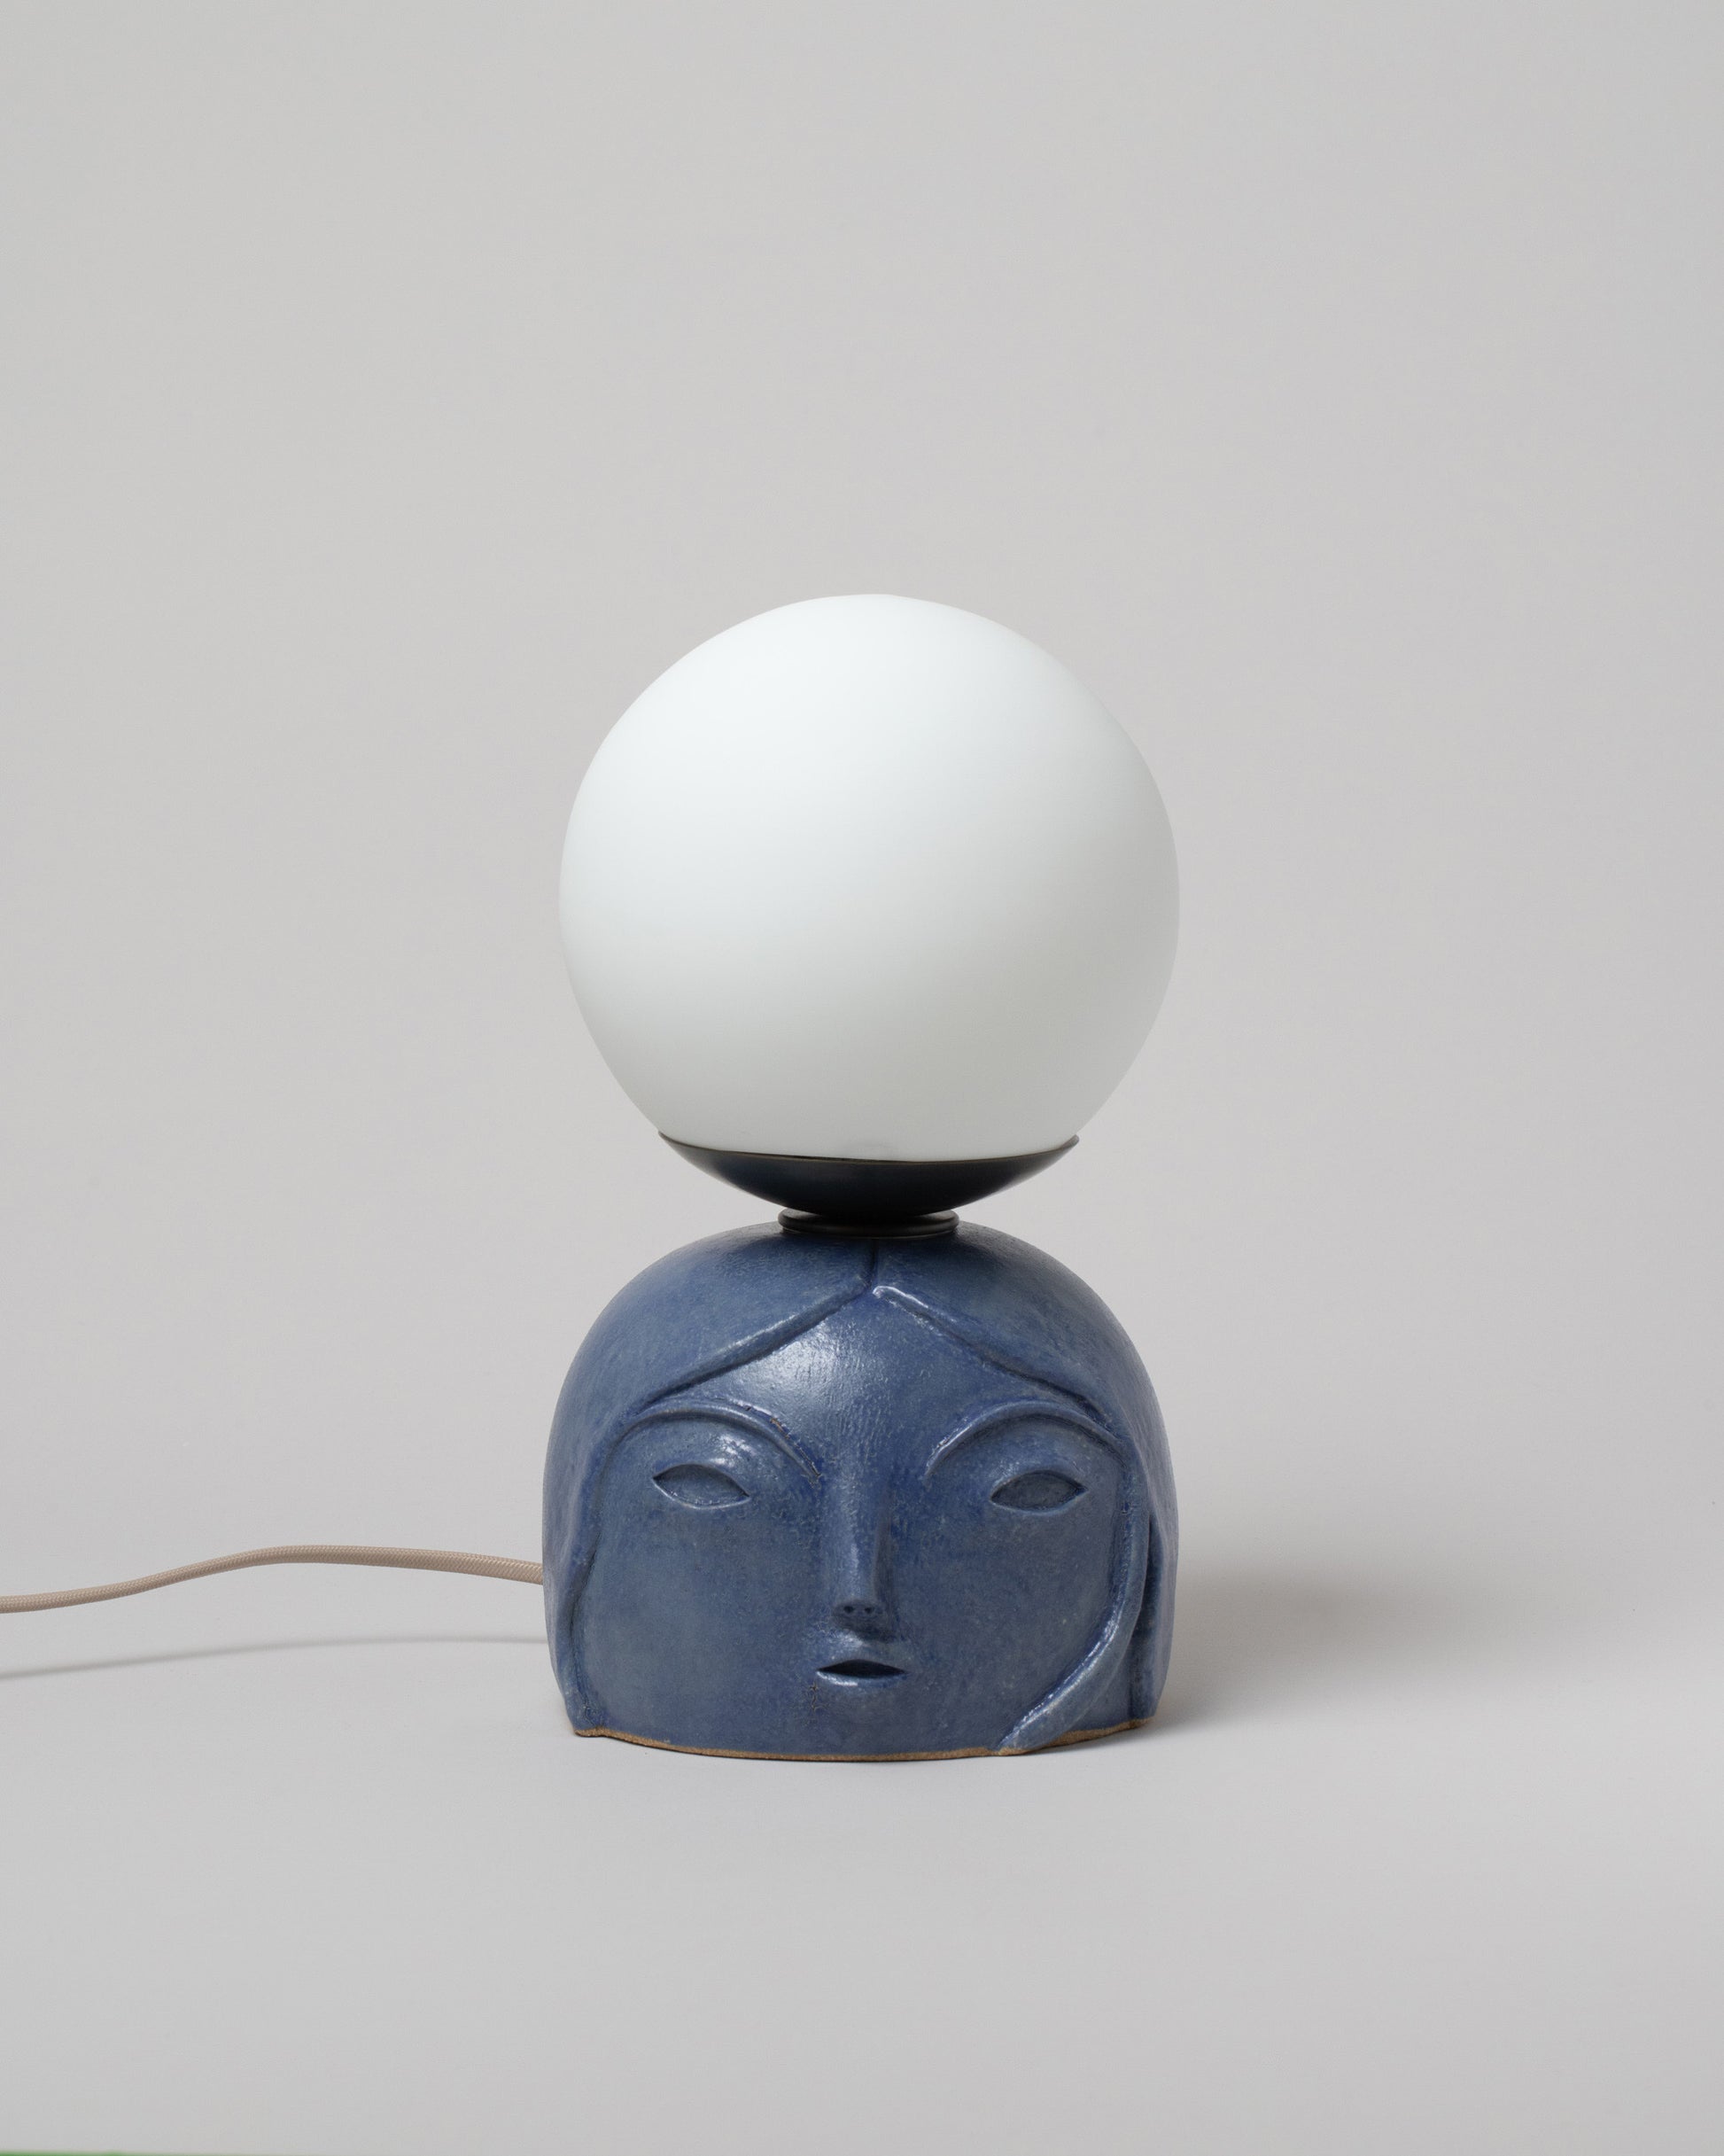 Floating Penelope Table Lamp Small / Persian Blue on light color background.